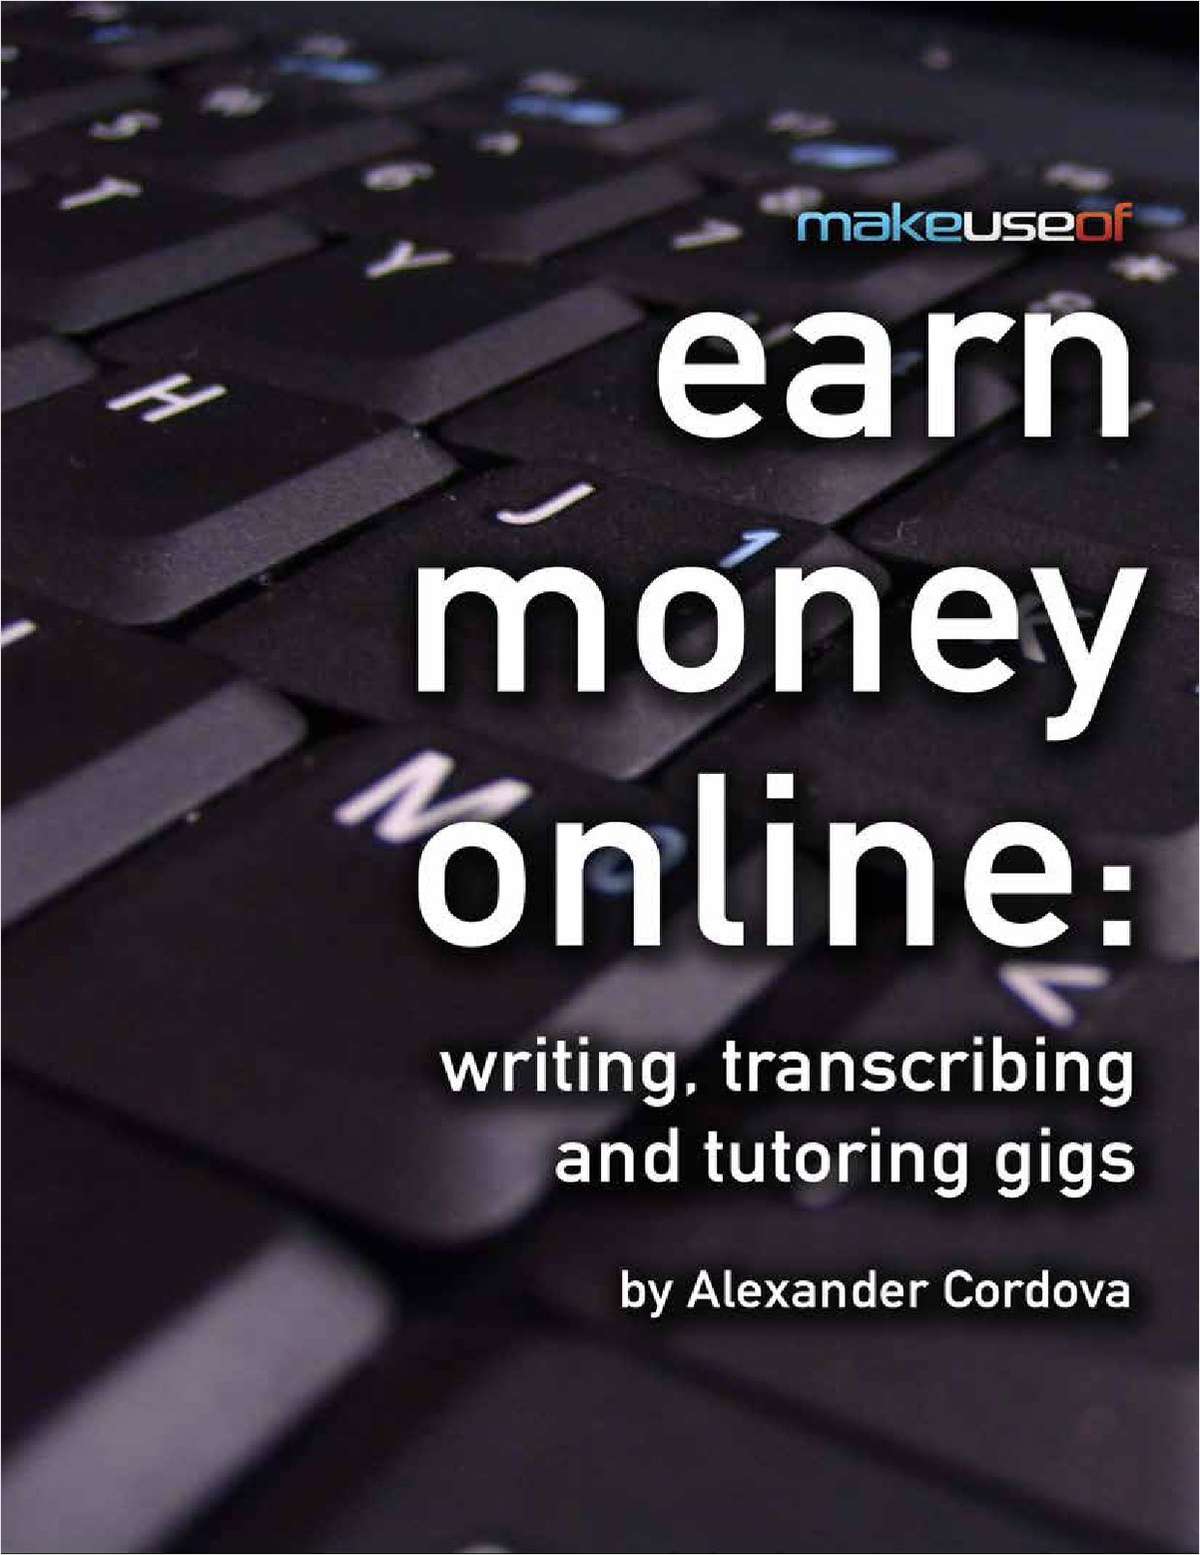 Your Guide to Making Money Online